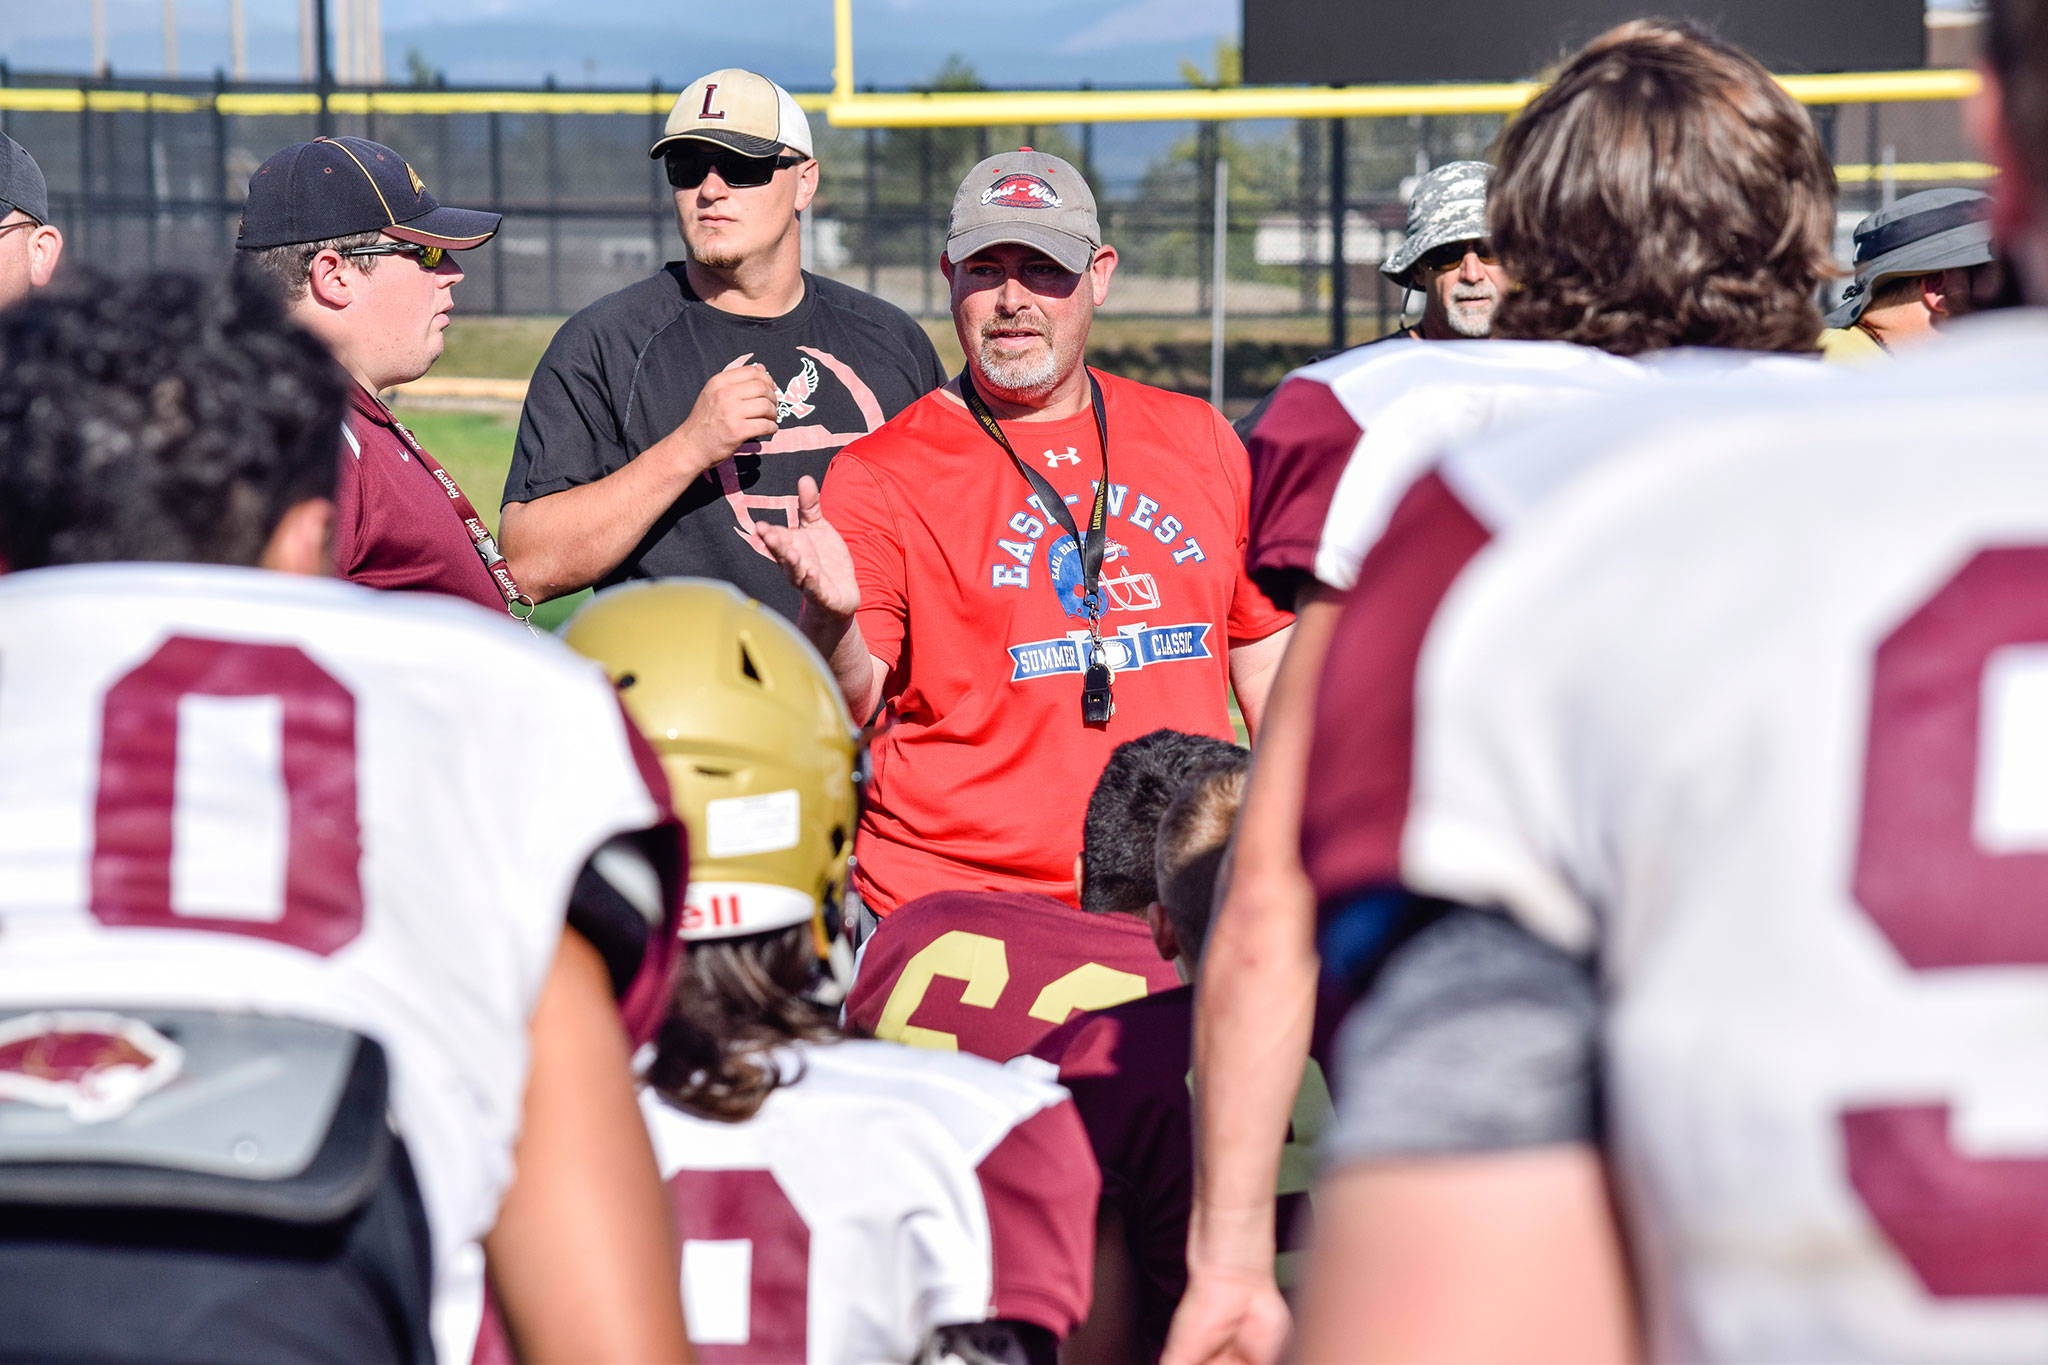 Lakewood head coach Dan Teeter reflects on the teams performance at the end of practice on Aug. 28, 2019, at Lakewood High School. Teeter was recently named the Cougars’ new head baseball coach. (Katie Webber / The Herald)